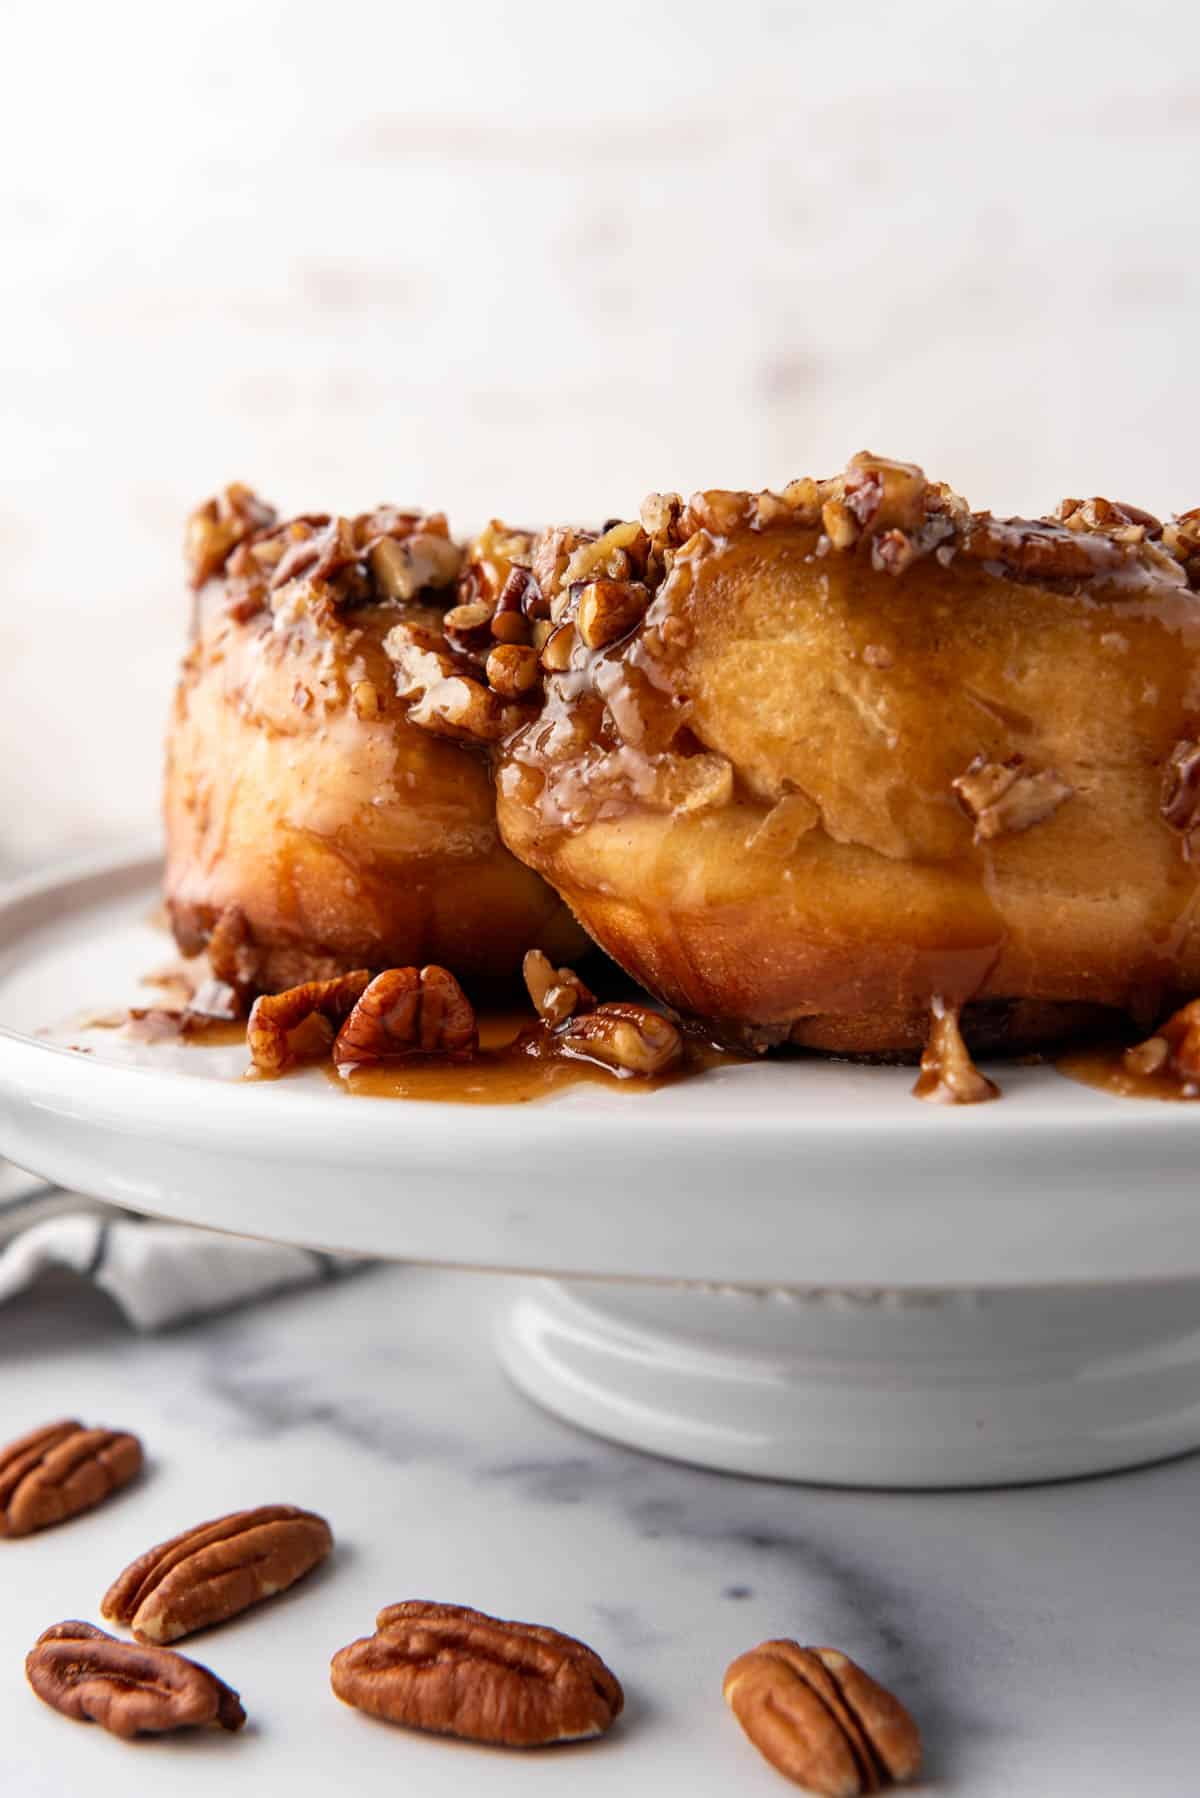 A close up image of a side view of caramel pecan sticky buns on a white cake stand.